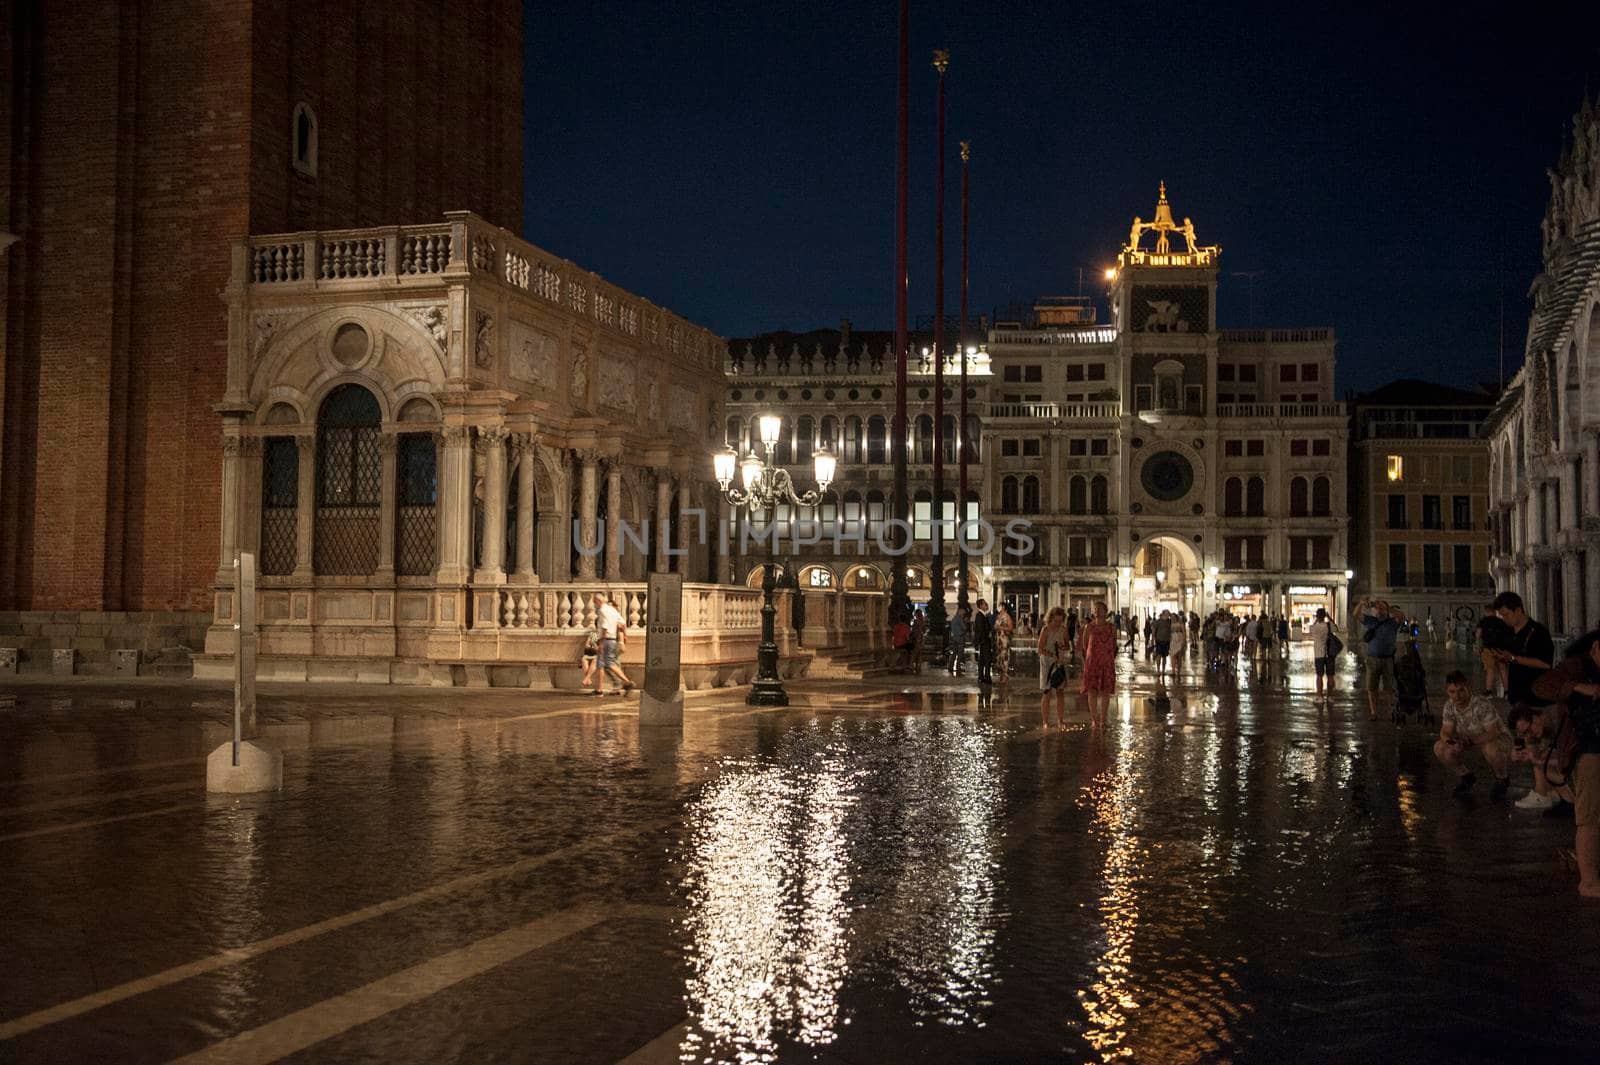 Piazza San Marco in Venice by night by Giamplume